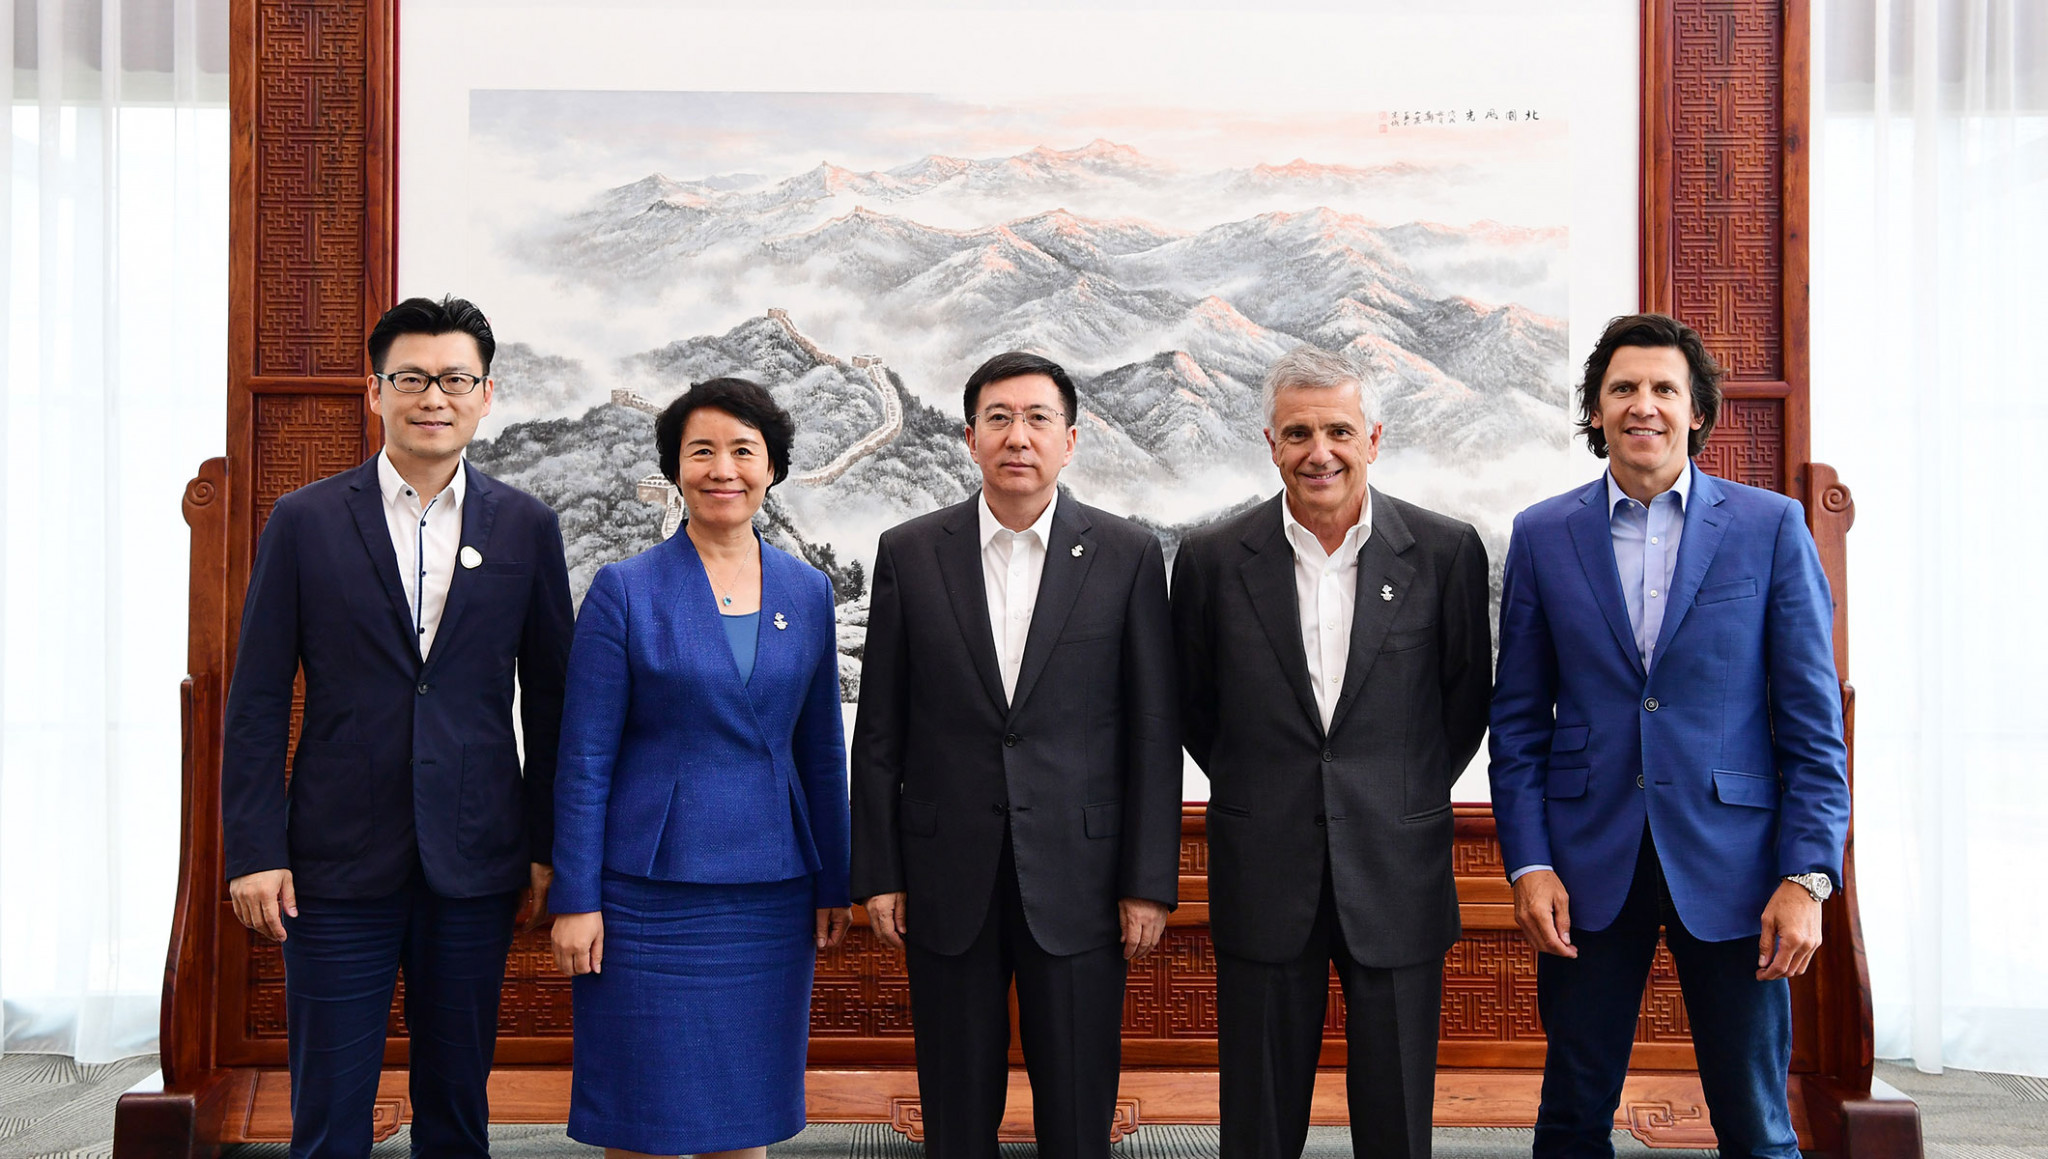 The deal between Beijing 2022, the IOC and Alibaba to provide tickets for the Winter Olympic and Paralympic Games was announced during an inspection visit led by Juan Antonio Samaranch, second right ©IOC